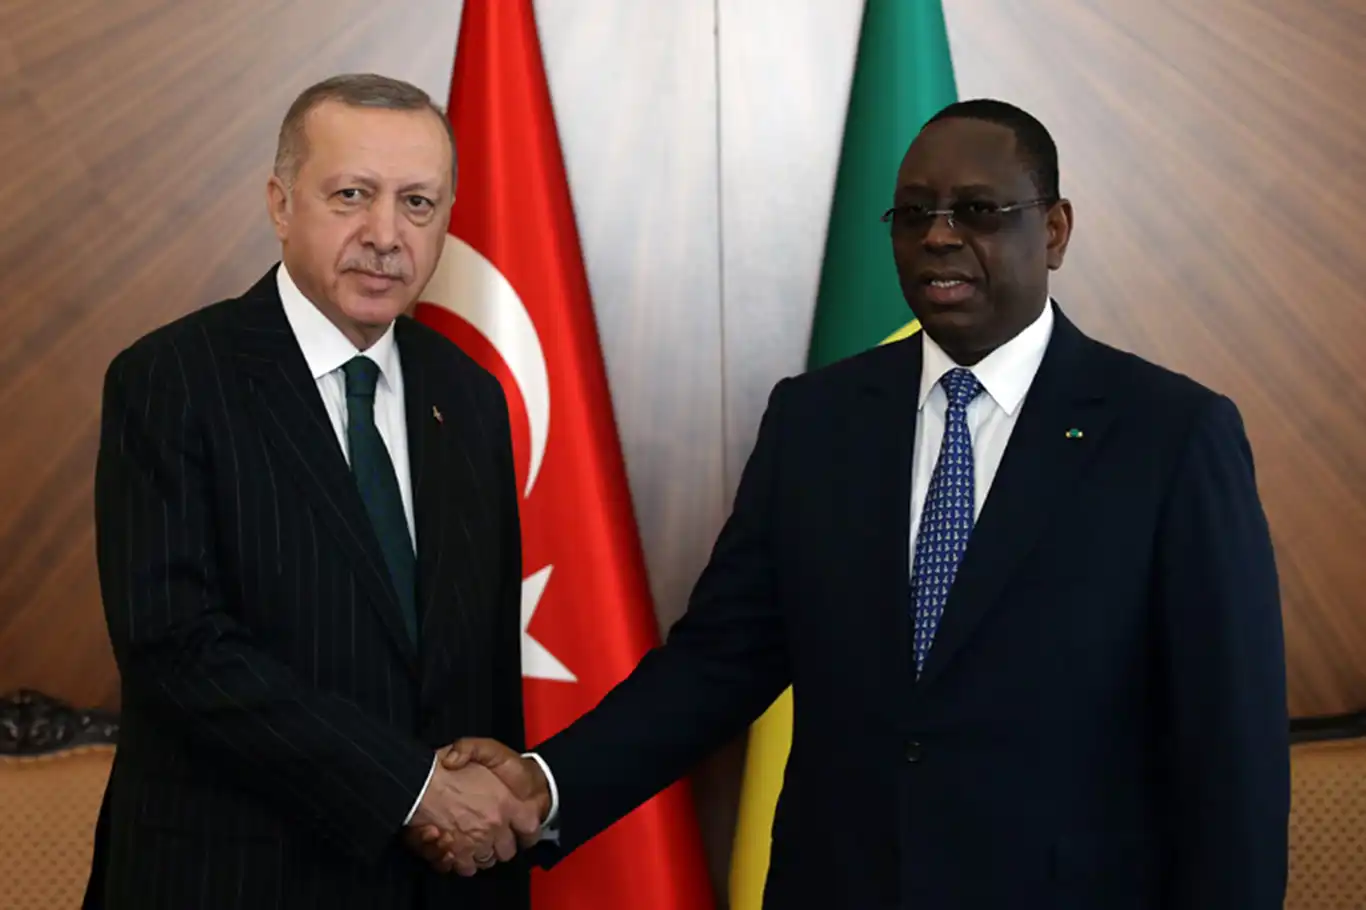 Erdoğan expresses optimism for Senegal’s future in call with Macky Sall